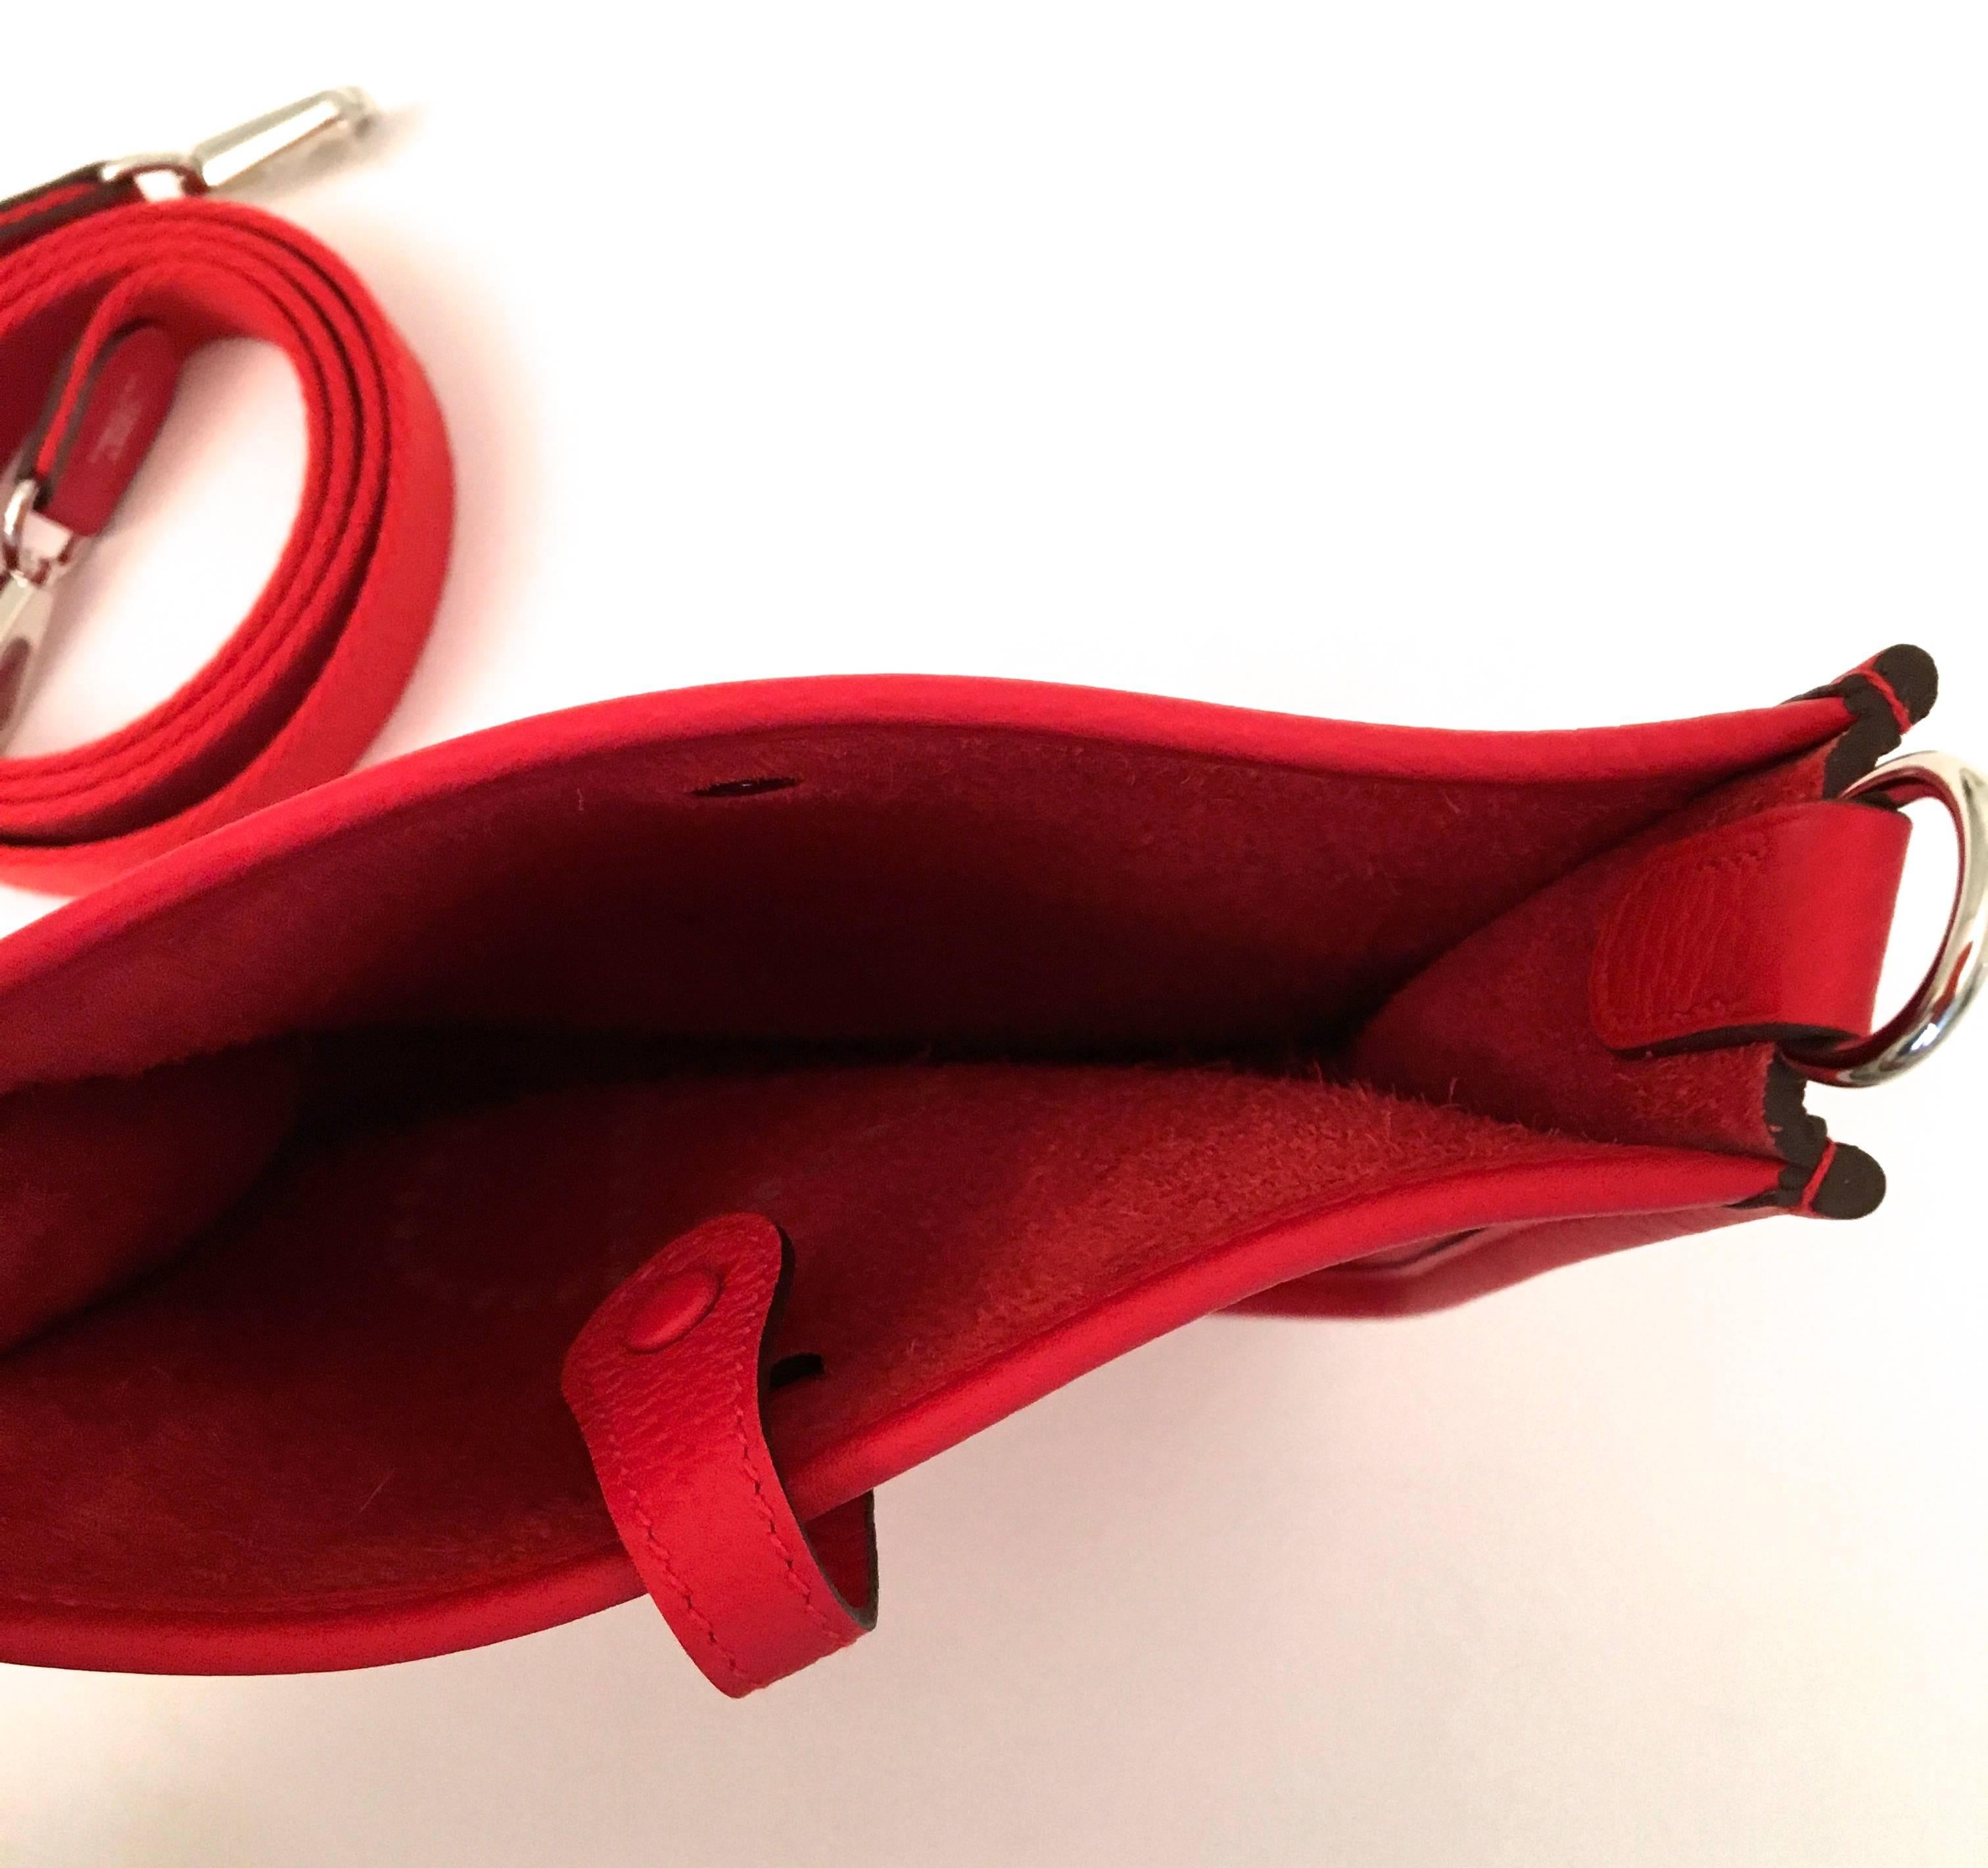 Beautiful Mini Evelyne / Evelyn shoulder bag in red tomato (rouge) Clemence leather.  This model is extremely difficult to find and is in very high demand. Comes with removable strap with palladium hardware. Beautifully crafted. 

Gorgeous color